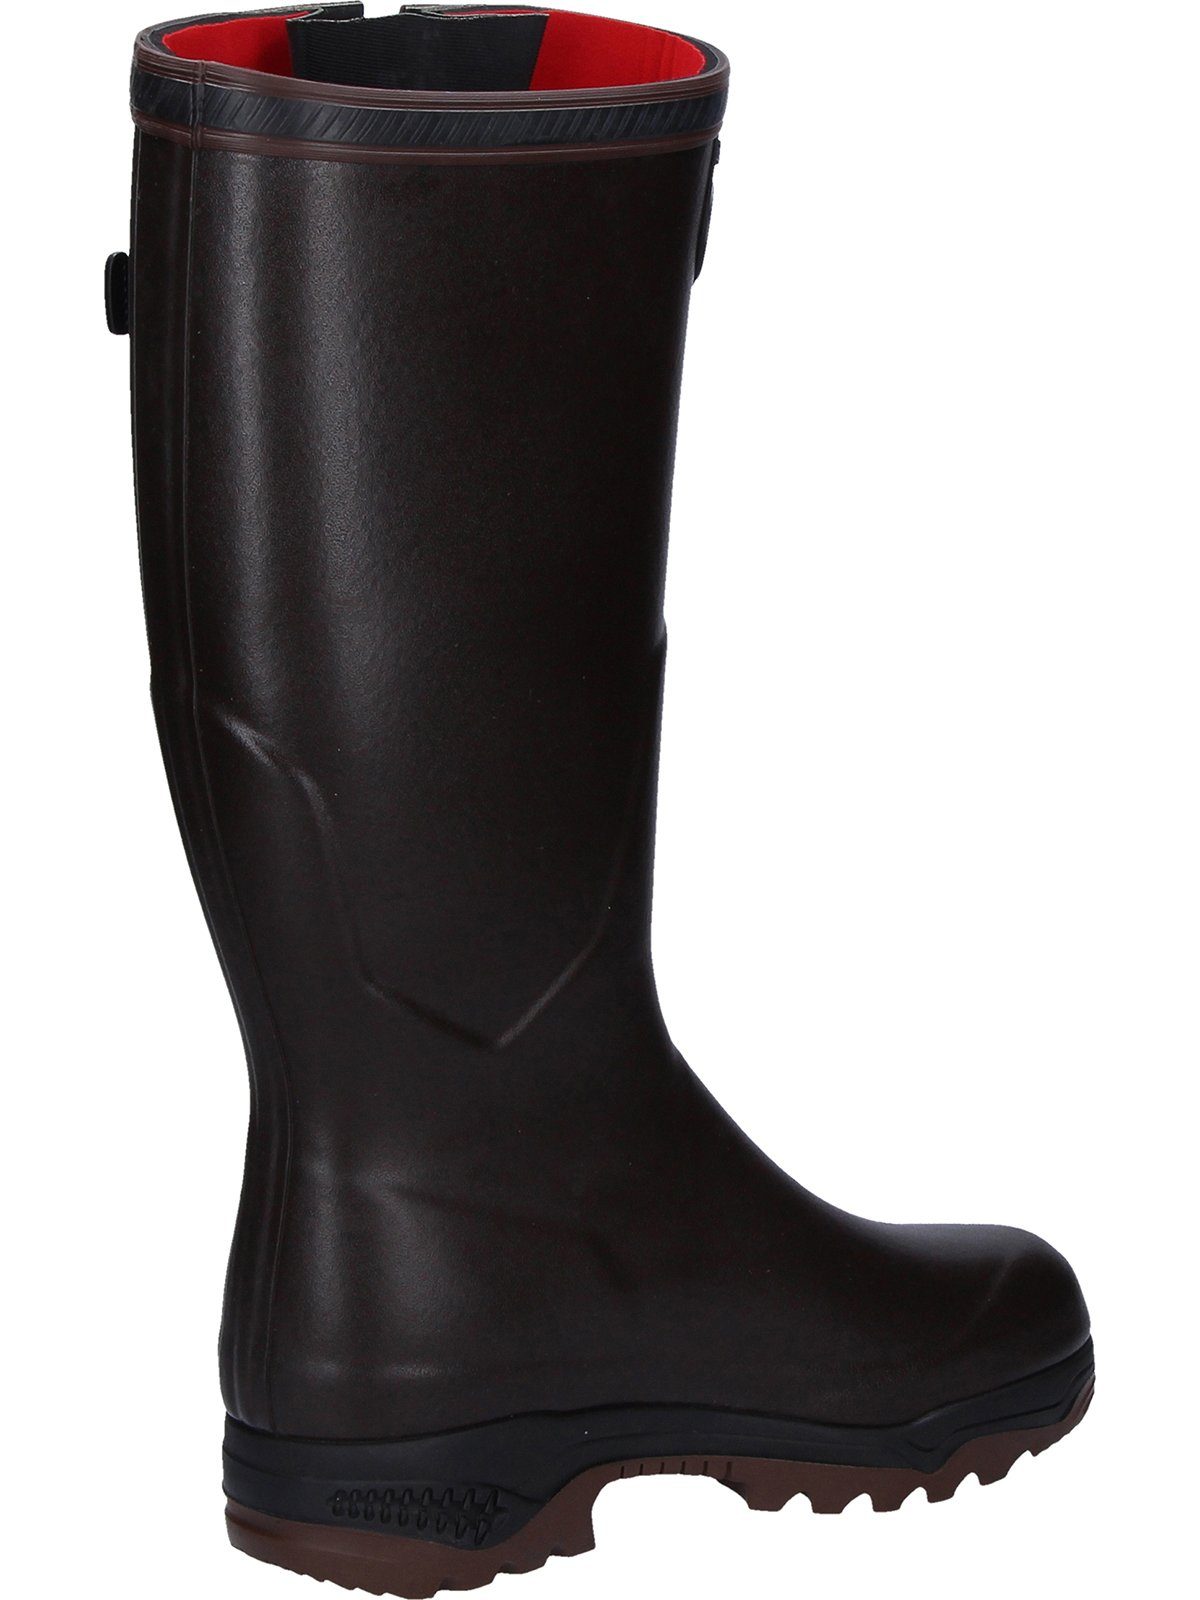 Parcours® Stiefel Iso Brun Aigle (Braun) 2